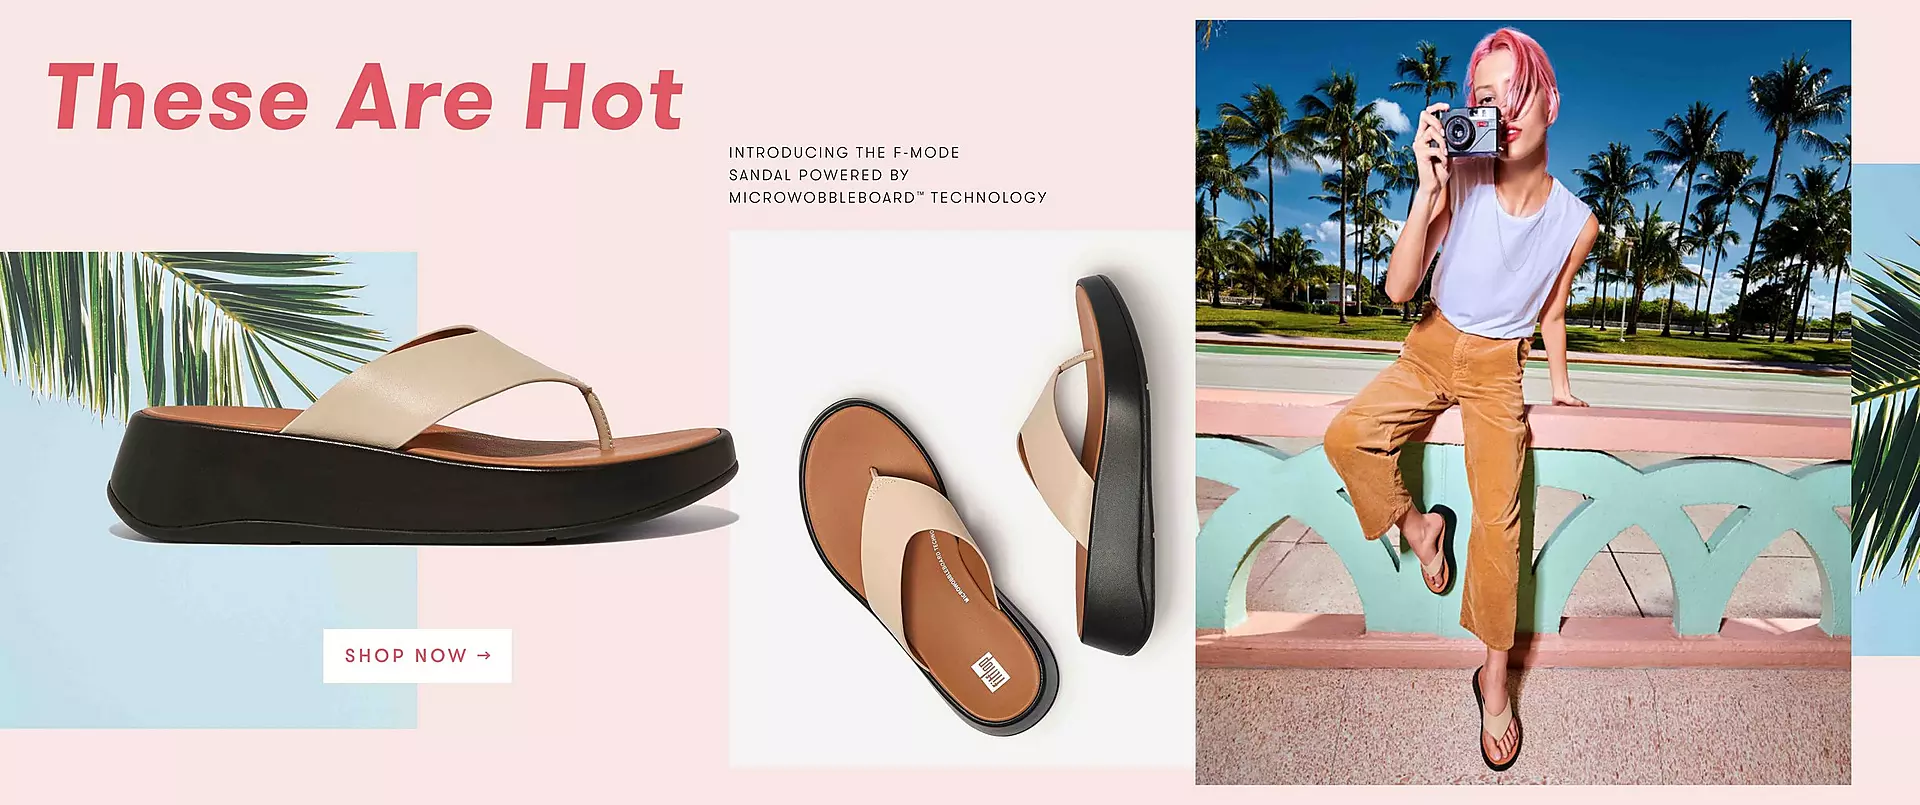 FitFlop - Up to 50% Off the Latest Styles